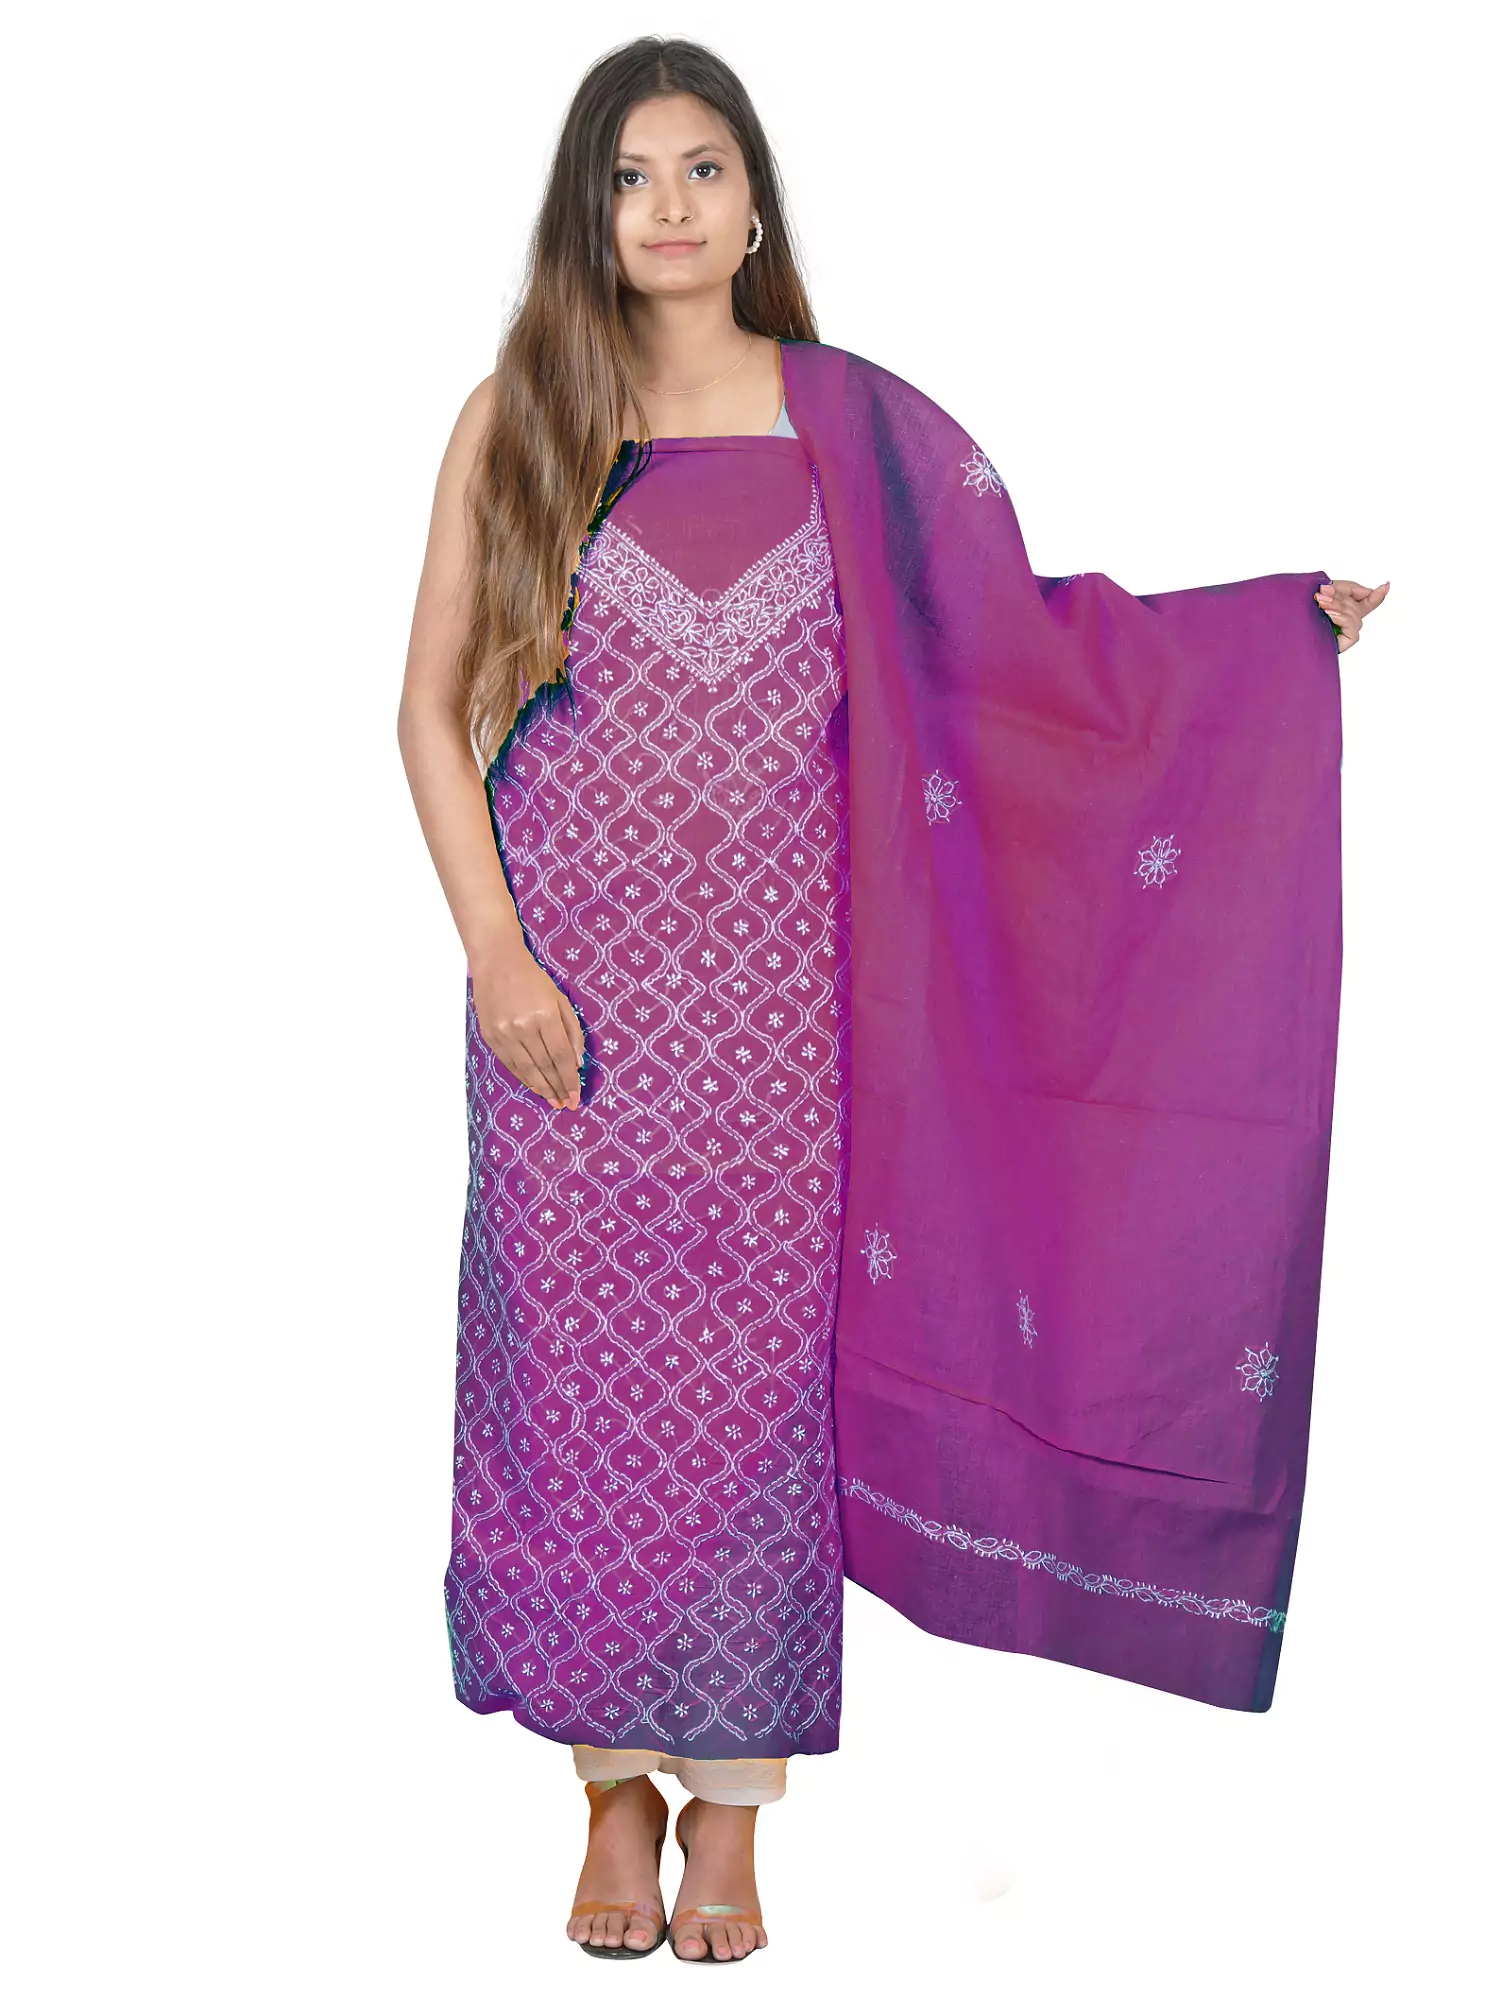 Lavangi Lucknow Chikan Wine Colour Anda Jaal Unstitched Cotton Dress Material